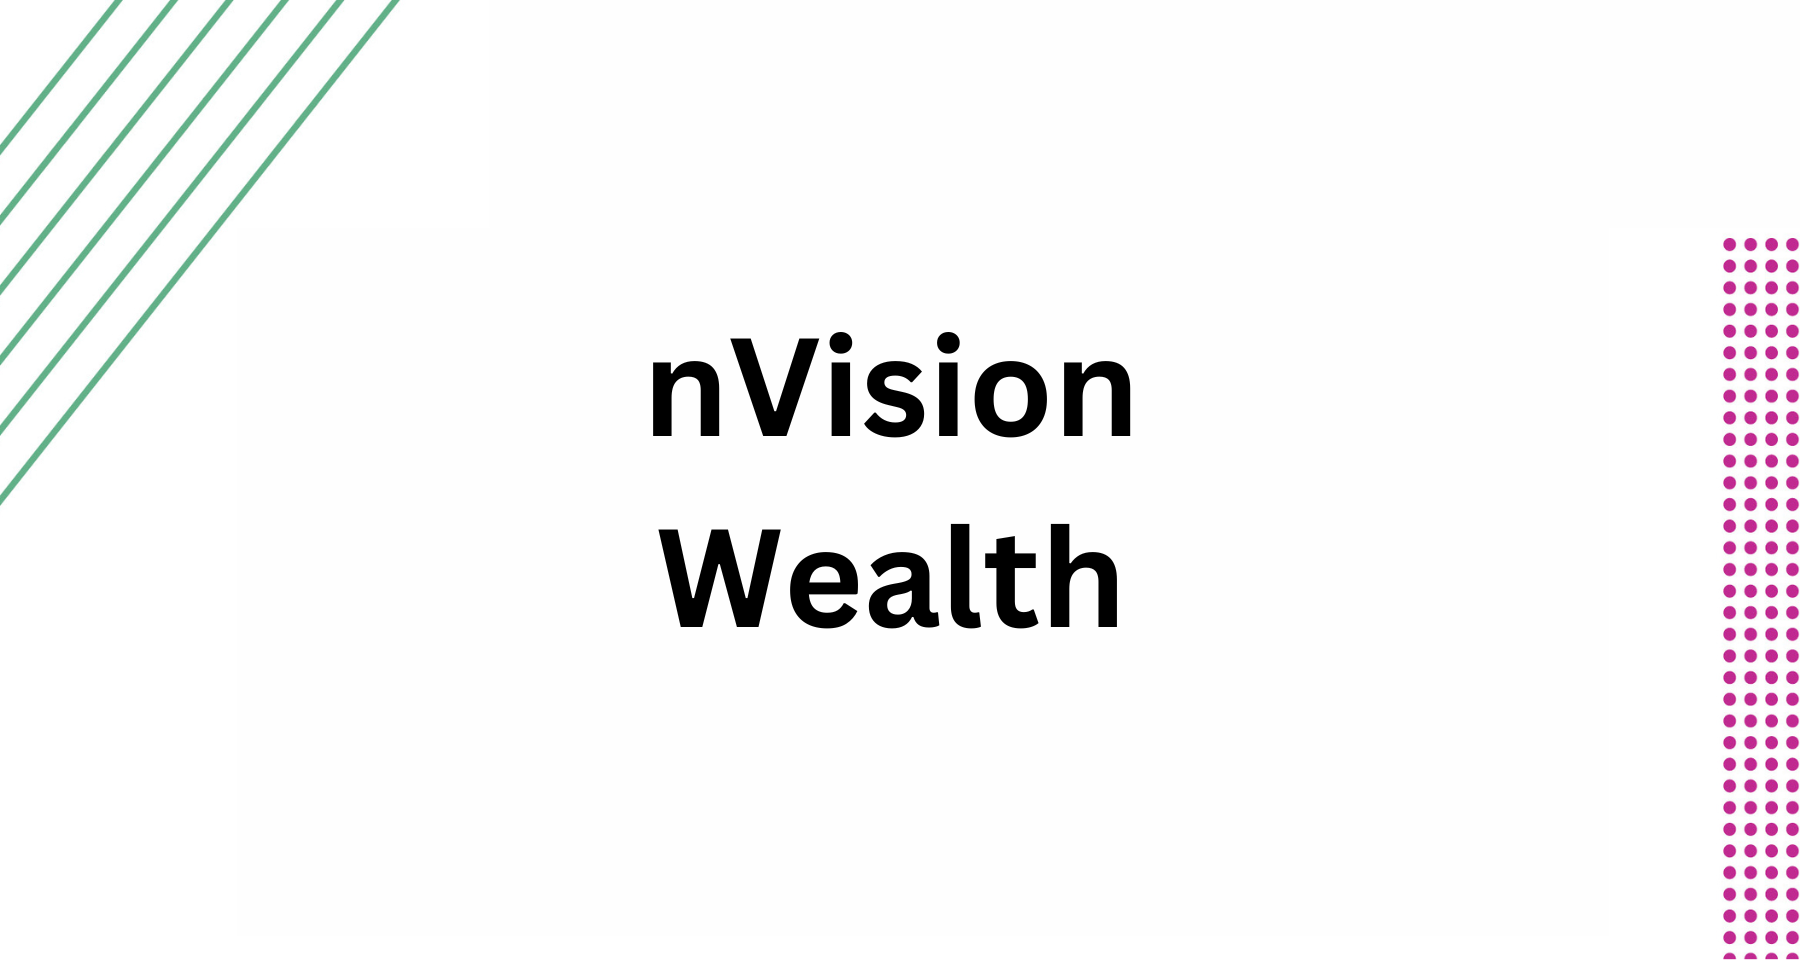 nVision Wealth